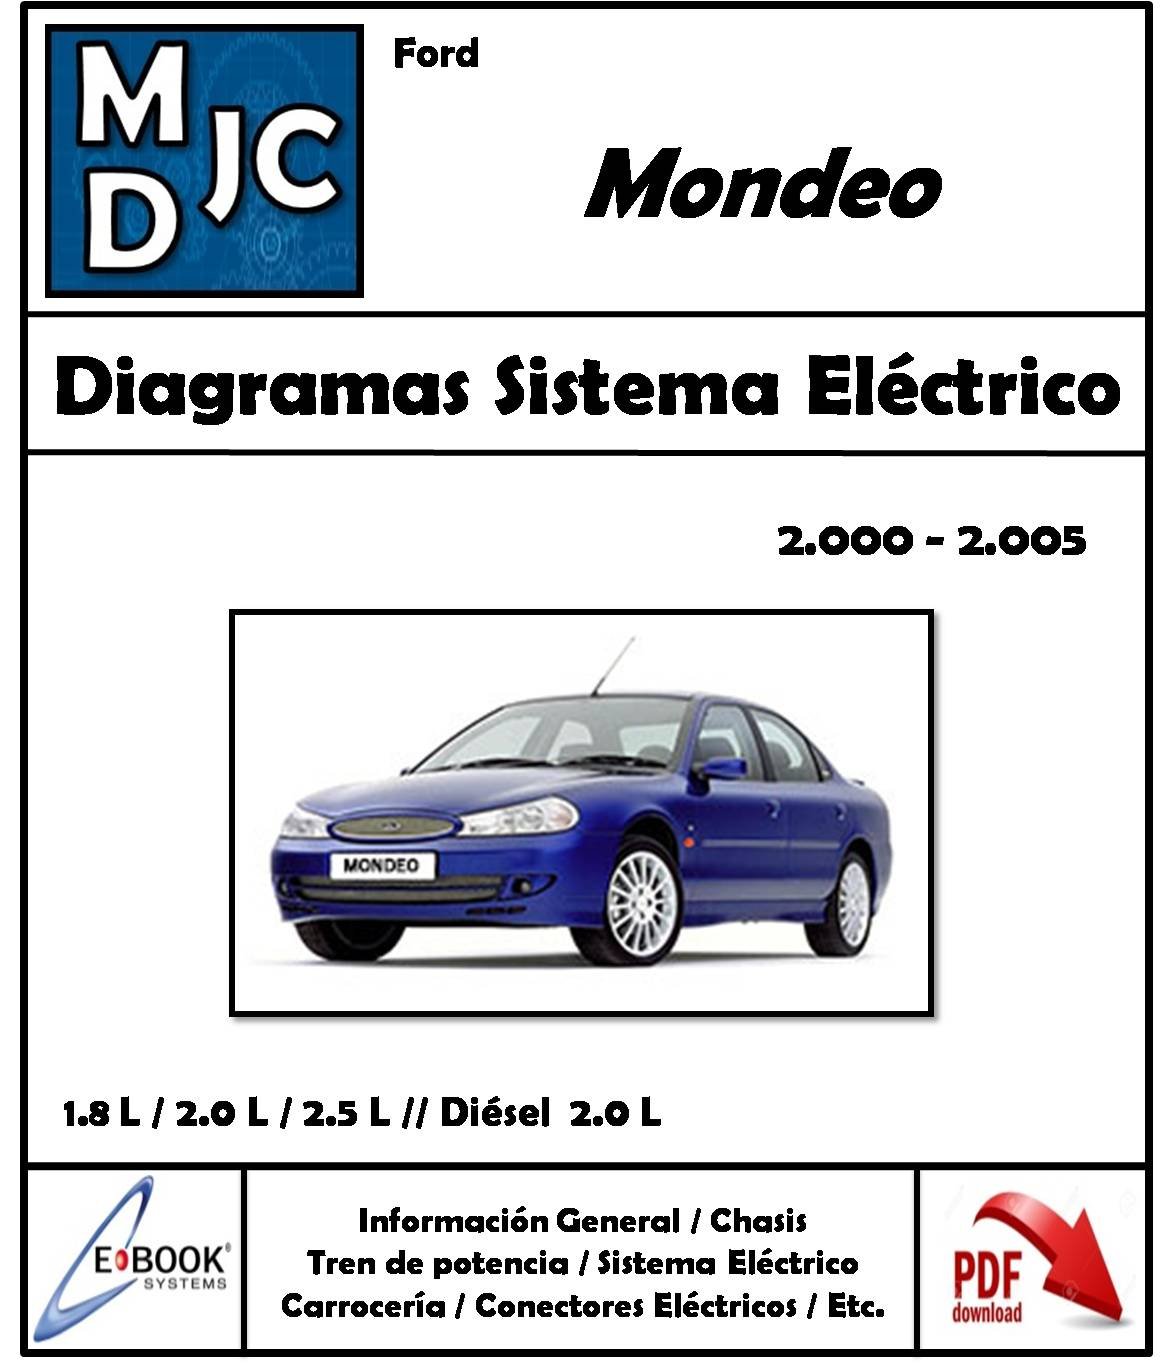 Ford Mondeo 2000 - 2005